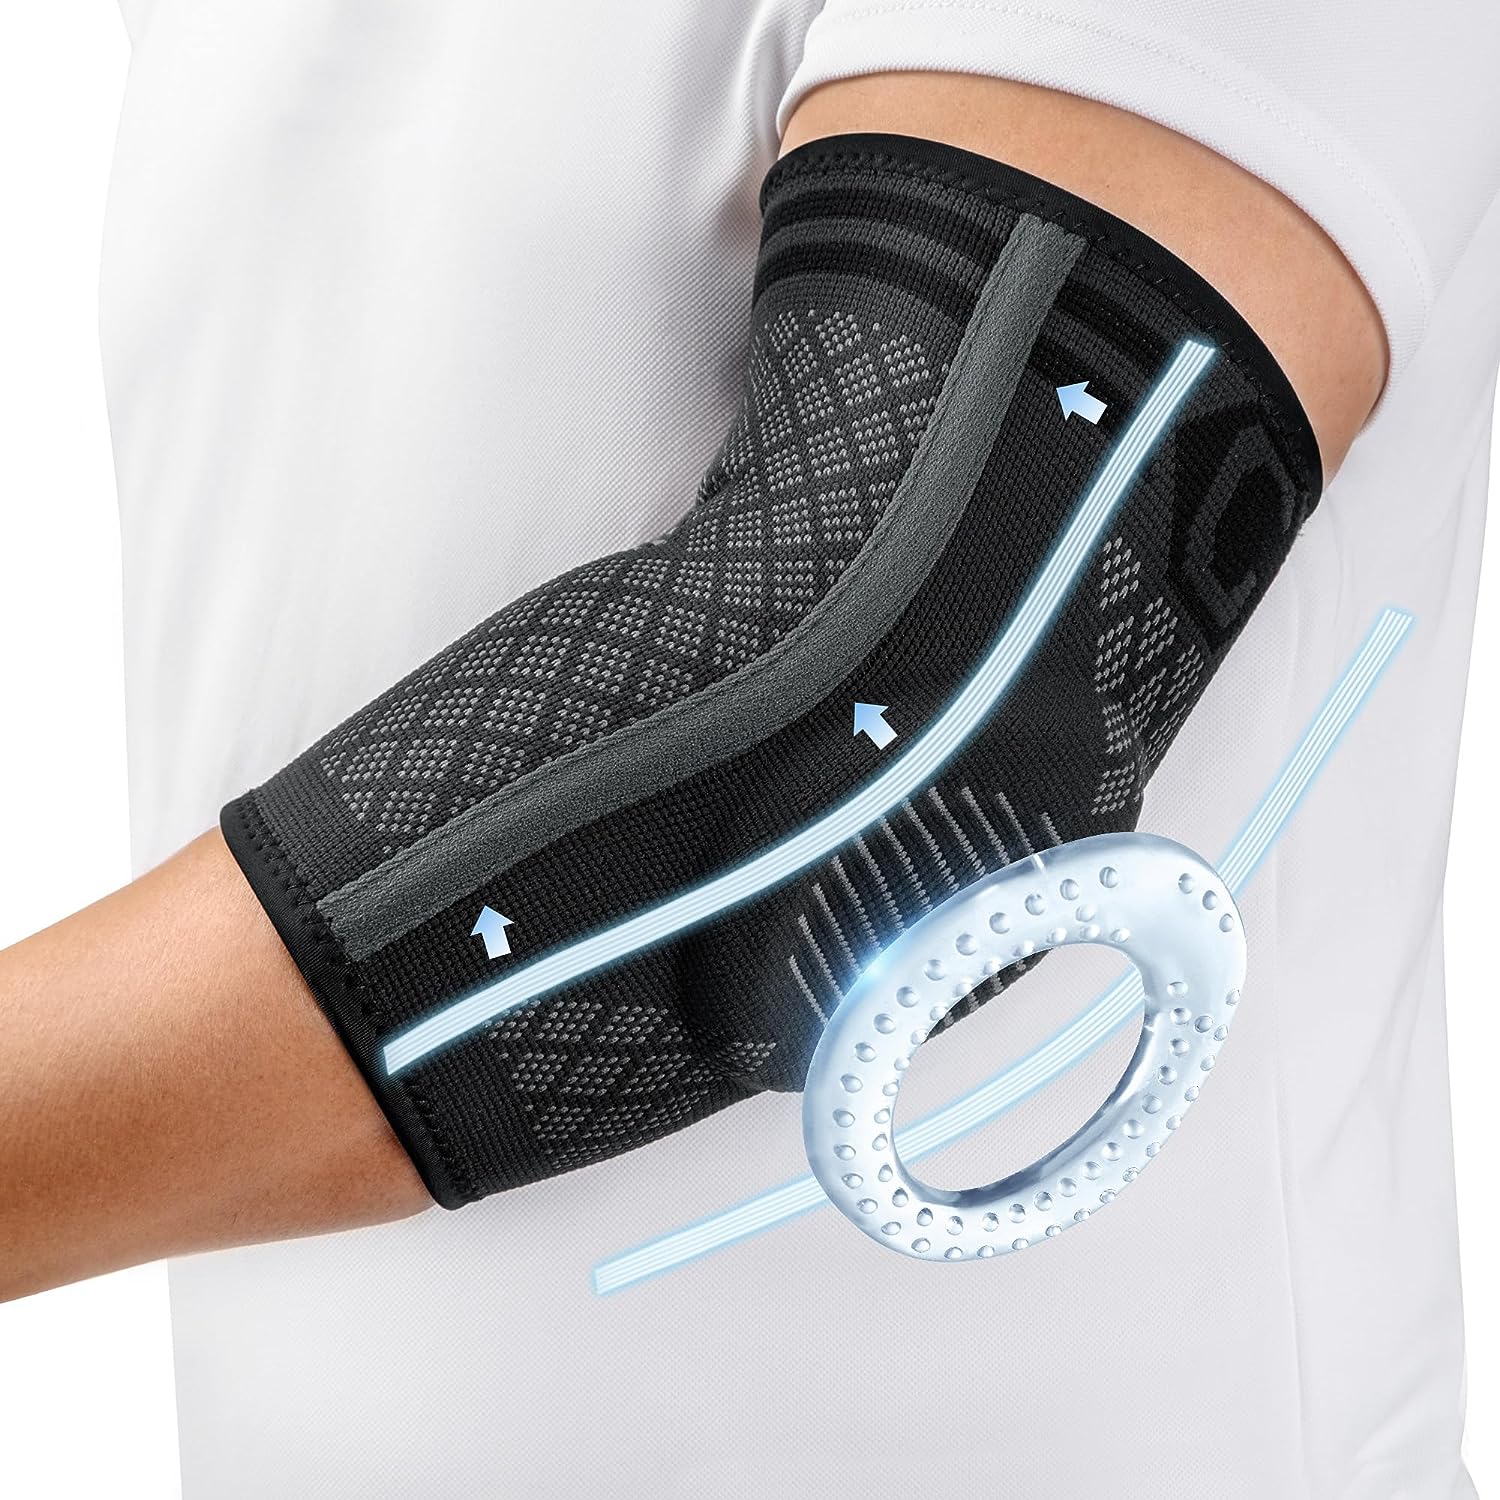 Elbow Wraps For Tendonitis Cheapest Offers | frpphils.com.ph